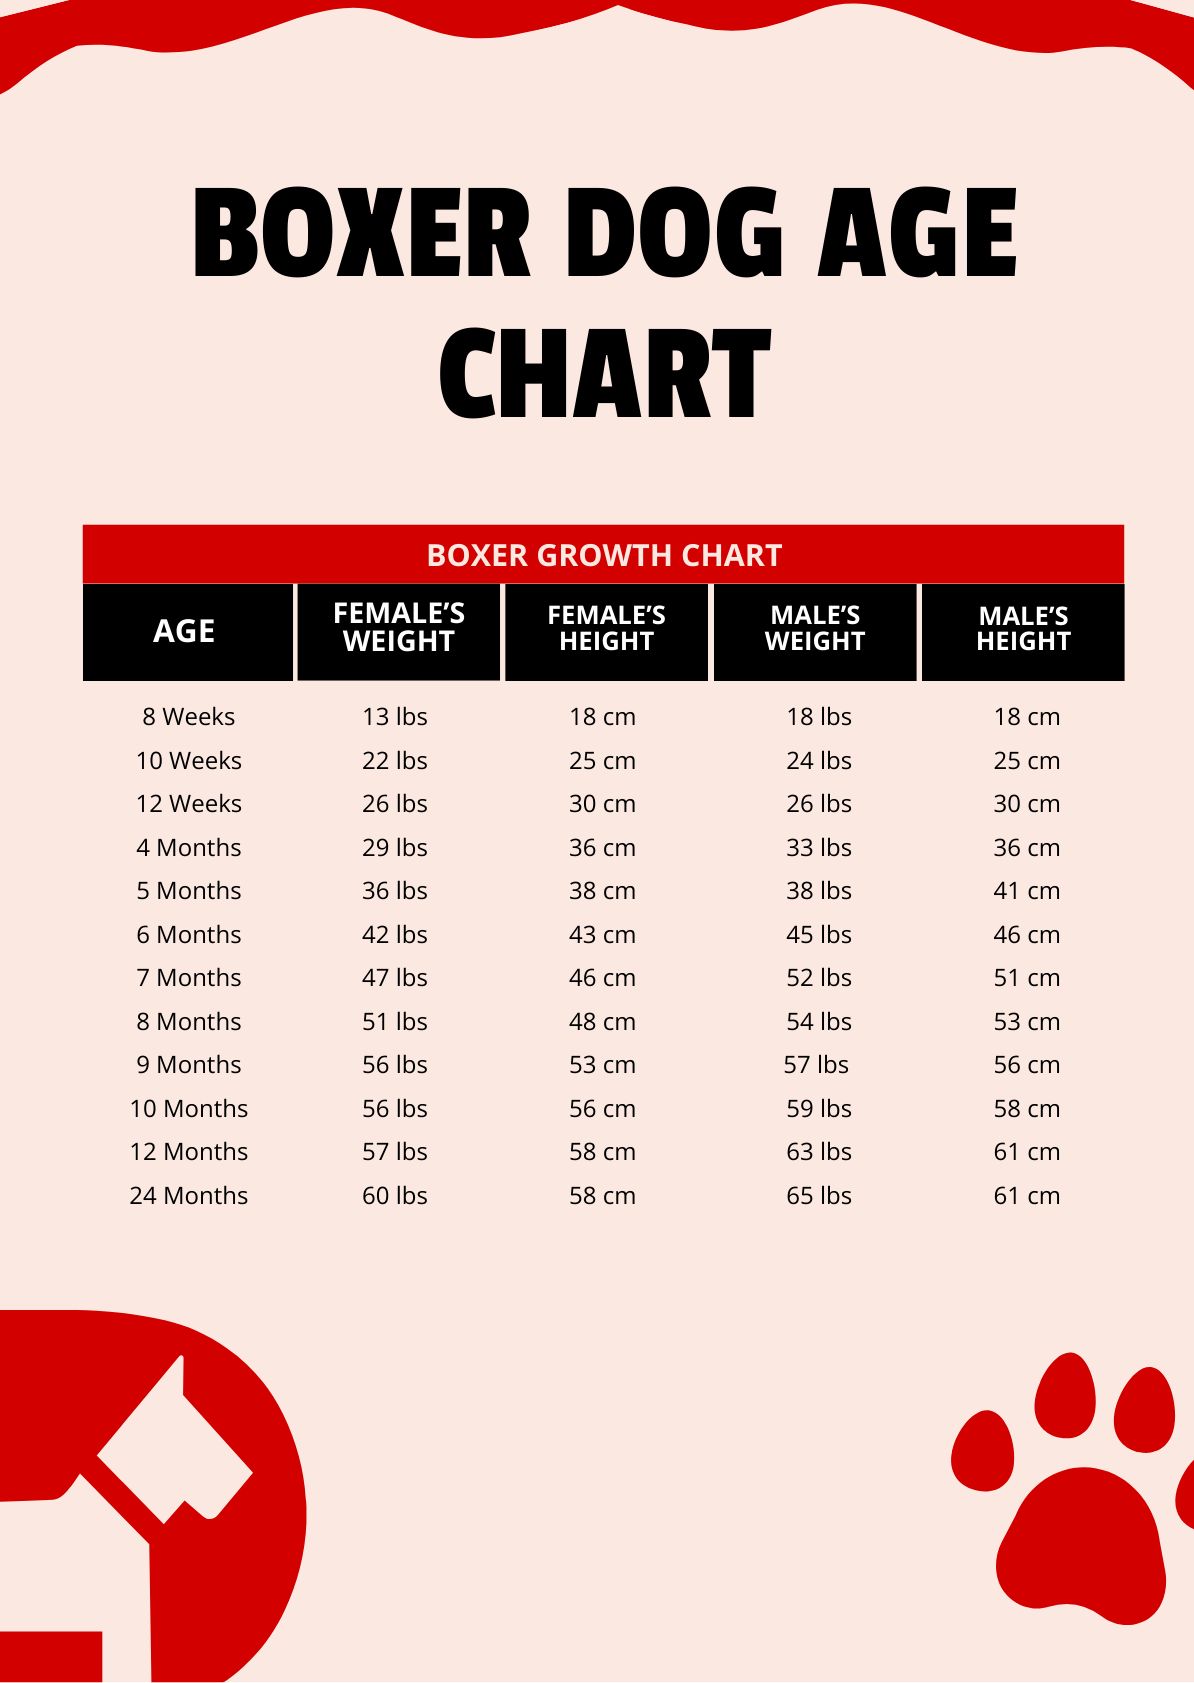 Free Printable Dog Age Chart - Download in PSD | Template.net